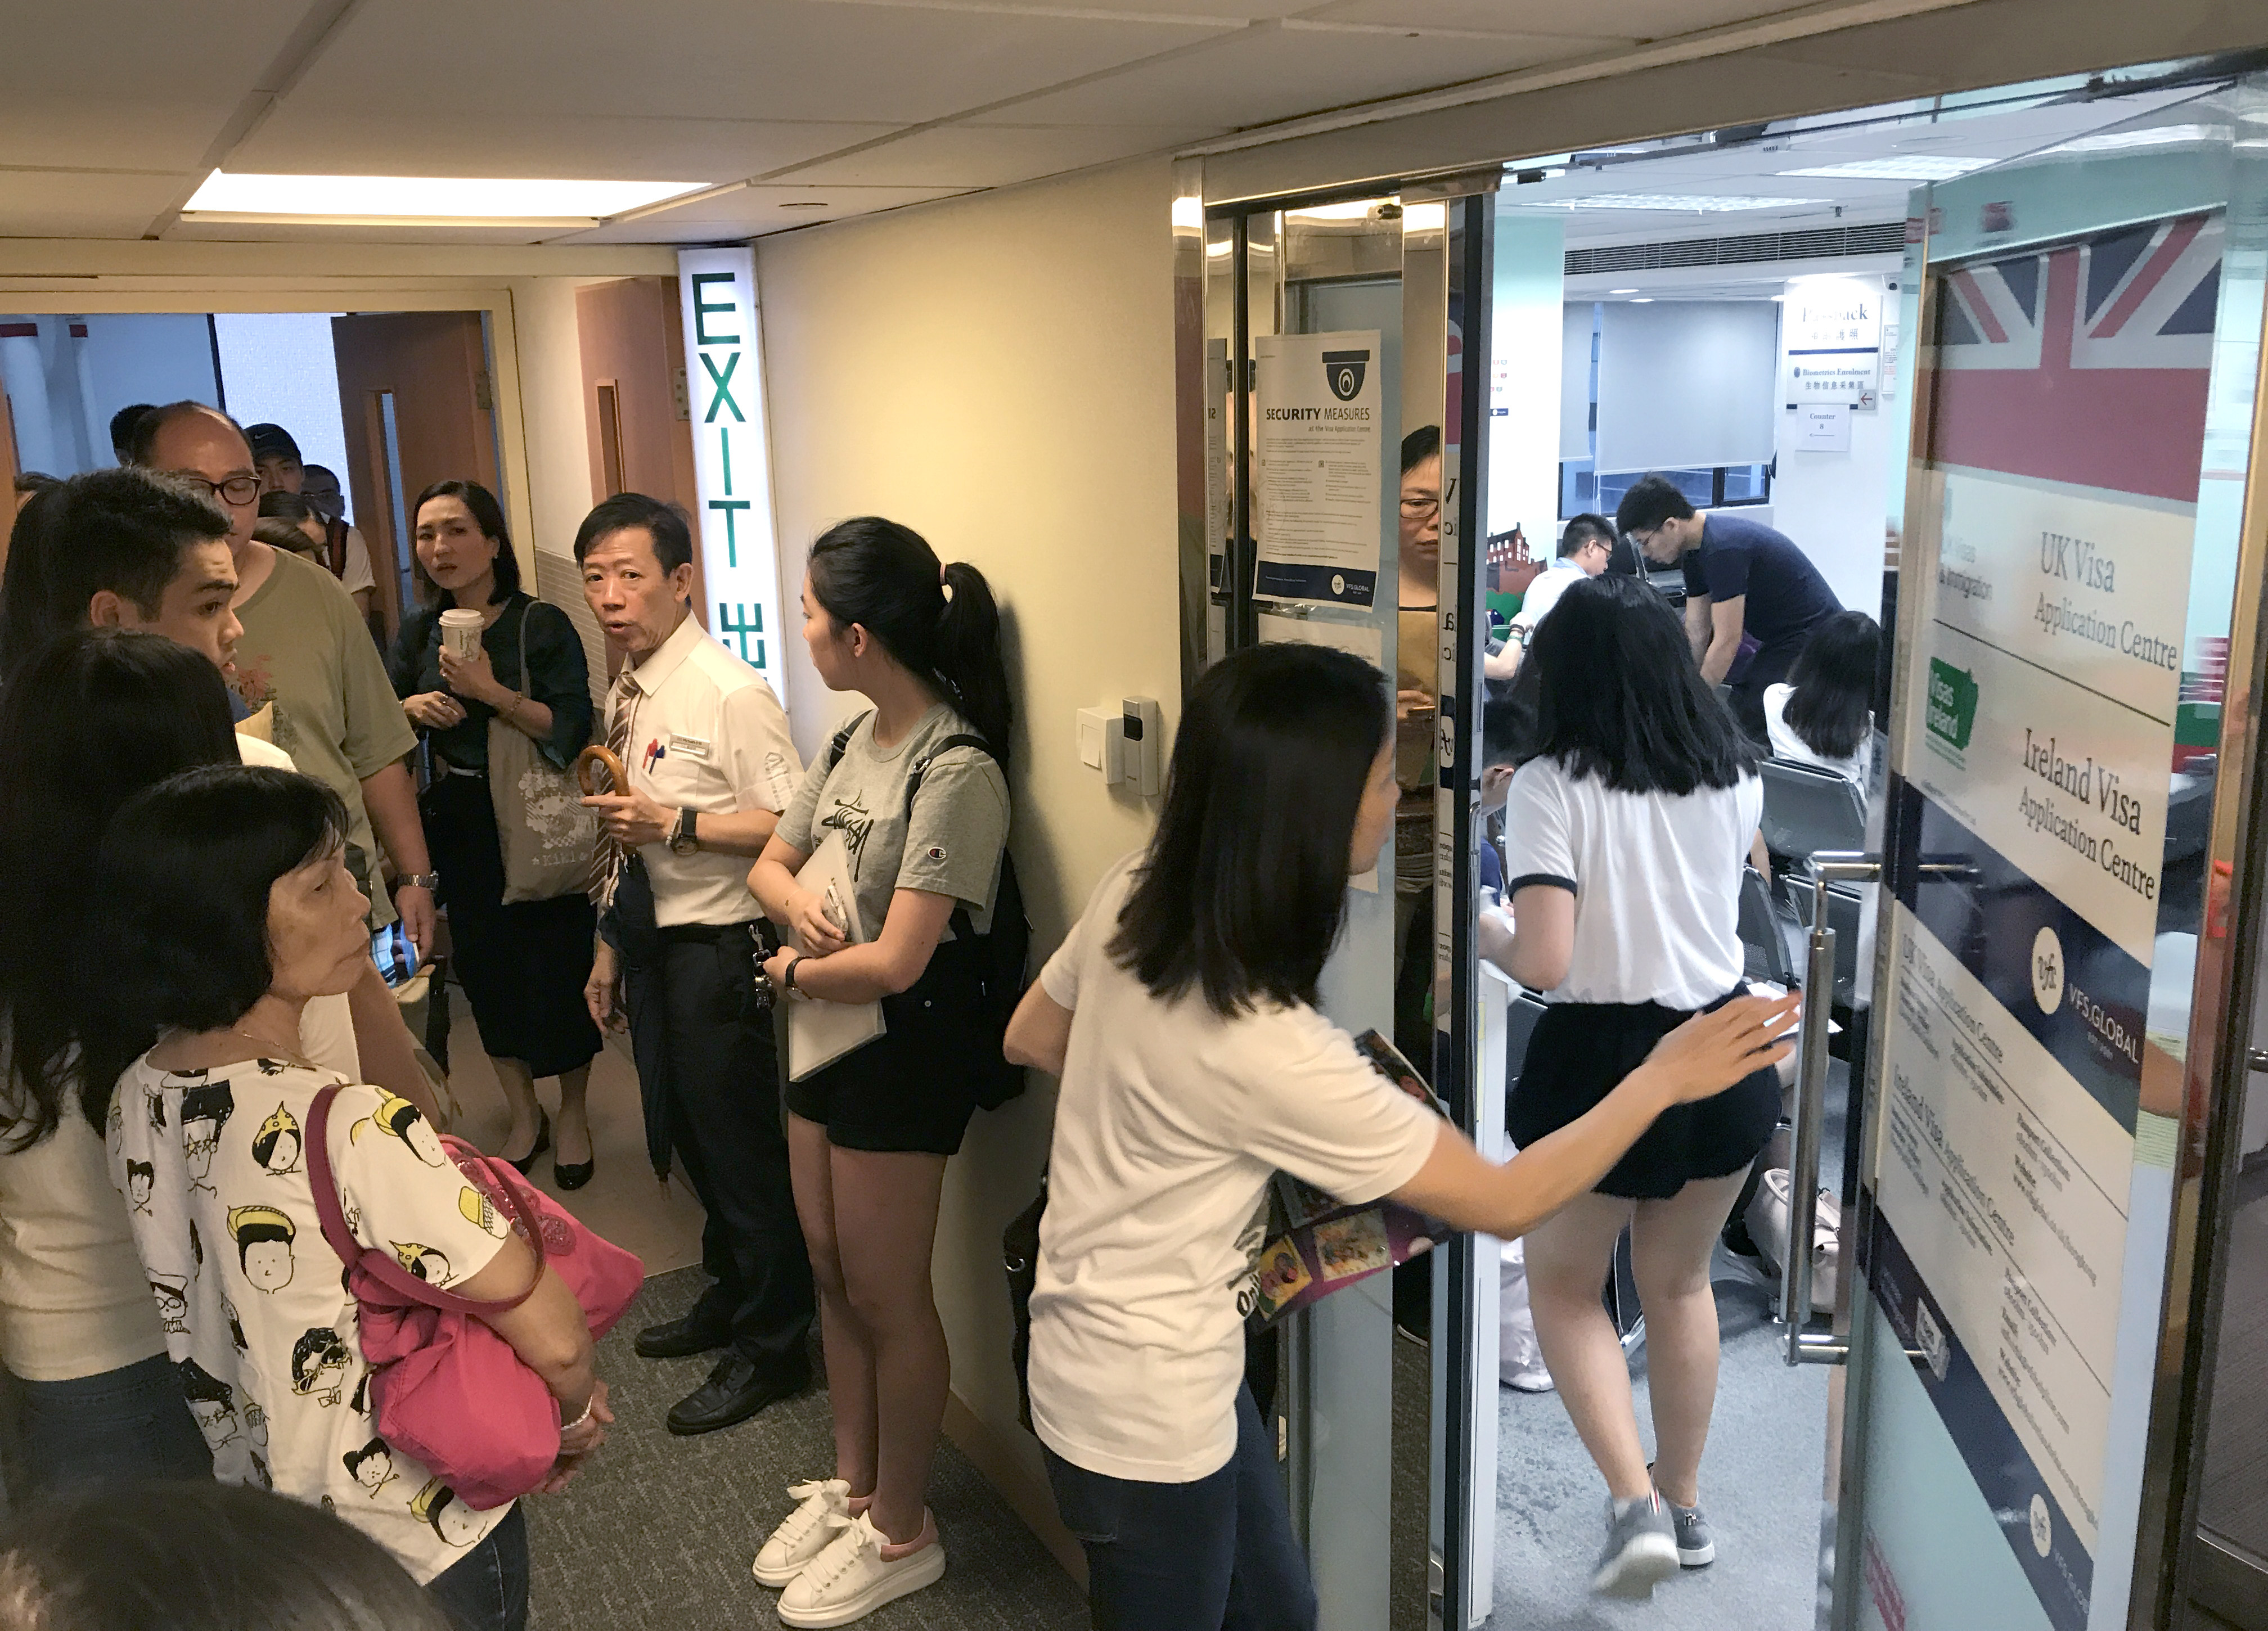 Students and their families queue at the UK Visa Application Centre in Causeway Bay, Hong Kong, on September 4, 2017. Britain’s Conservative-led government is targeting international students as a way to reduce immigration despite the key role they play in funding British universities and bringing talent into the country. Photo: Nora Tam